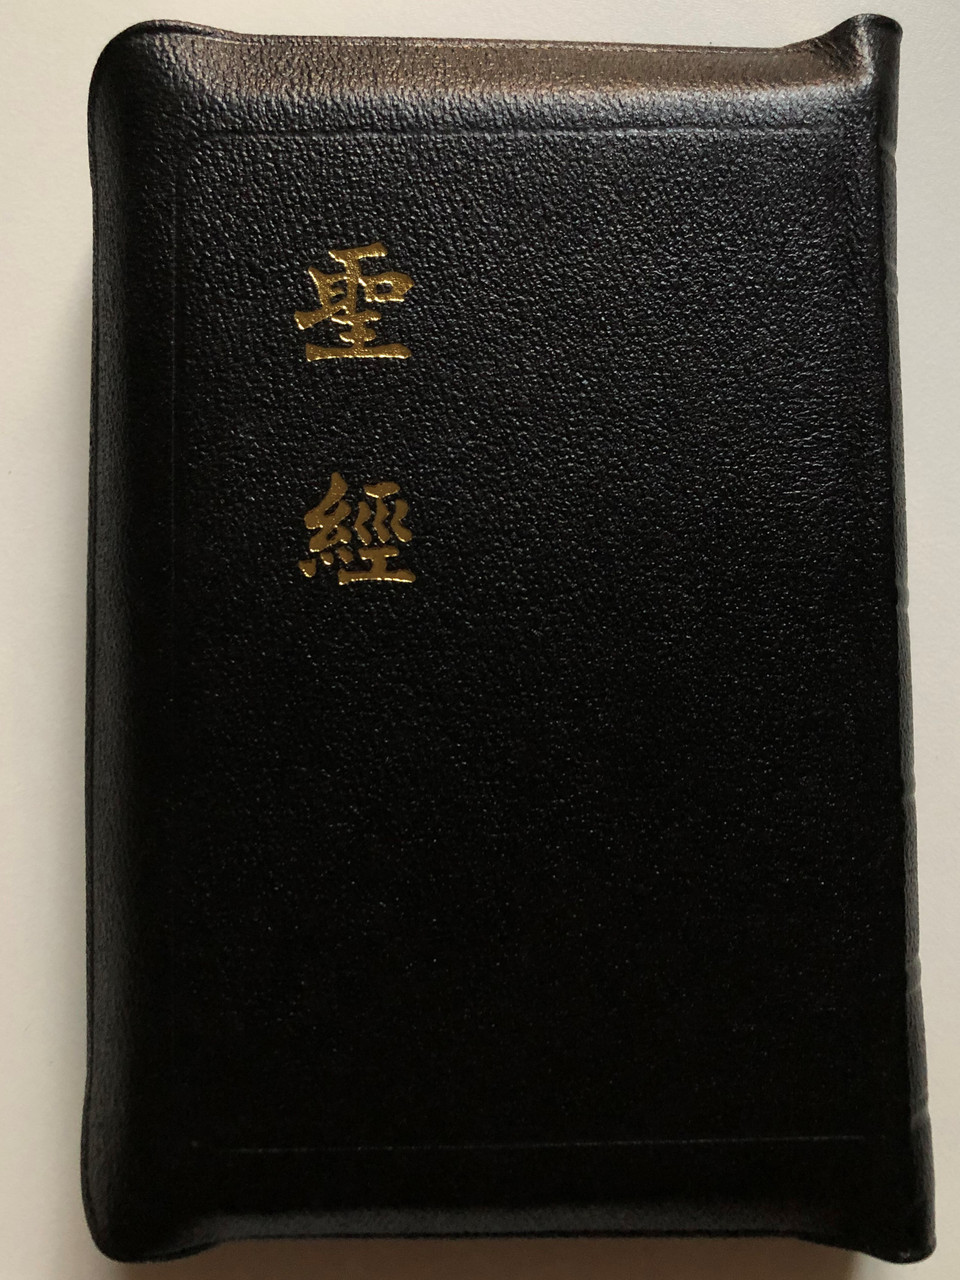 https://cdn10.bigcommerce.com/s-62bdpkt7pb/products/50653/images/258267/Chinese_Vertical_Script_Holy_Bible_1__11590.1668174613.1280.1280.JPG?c=2